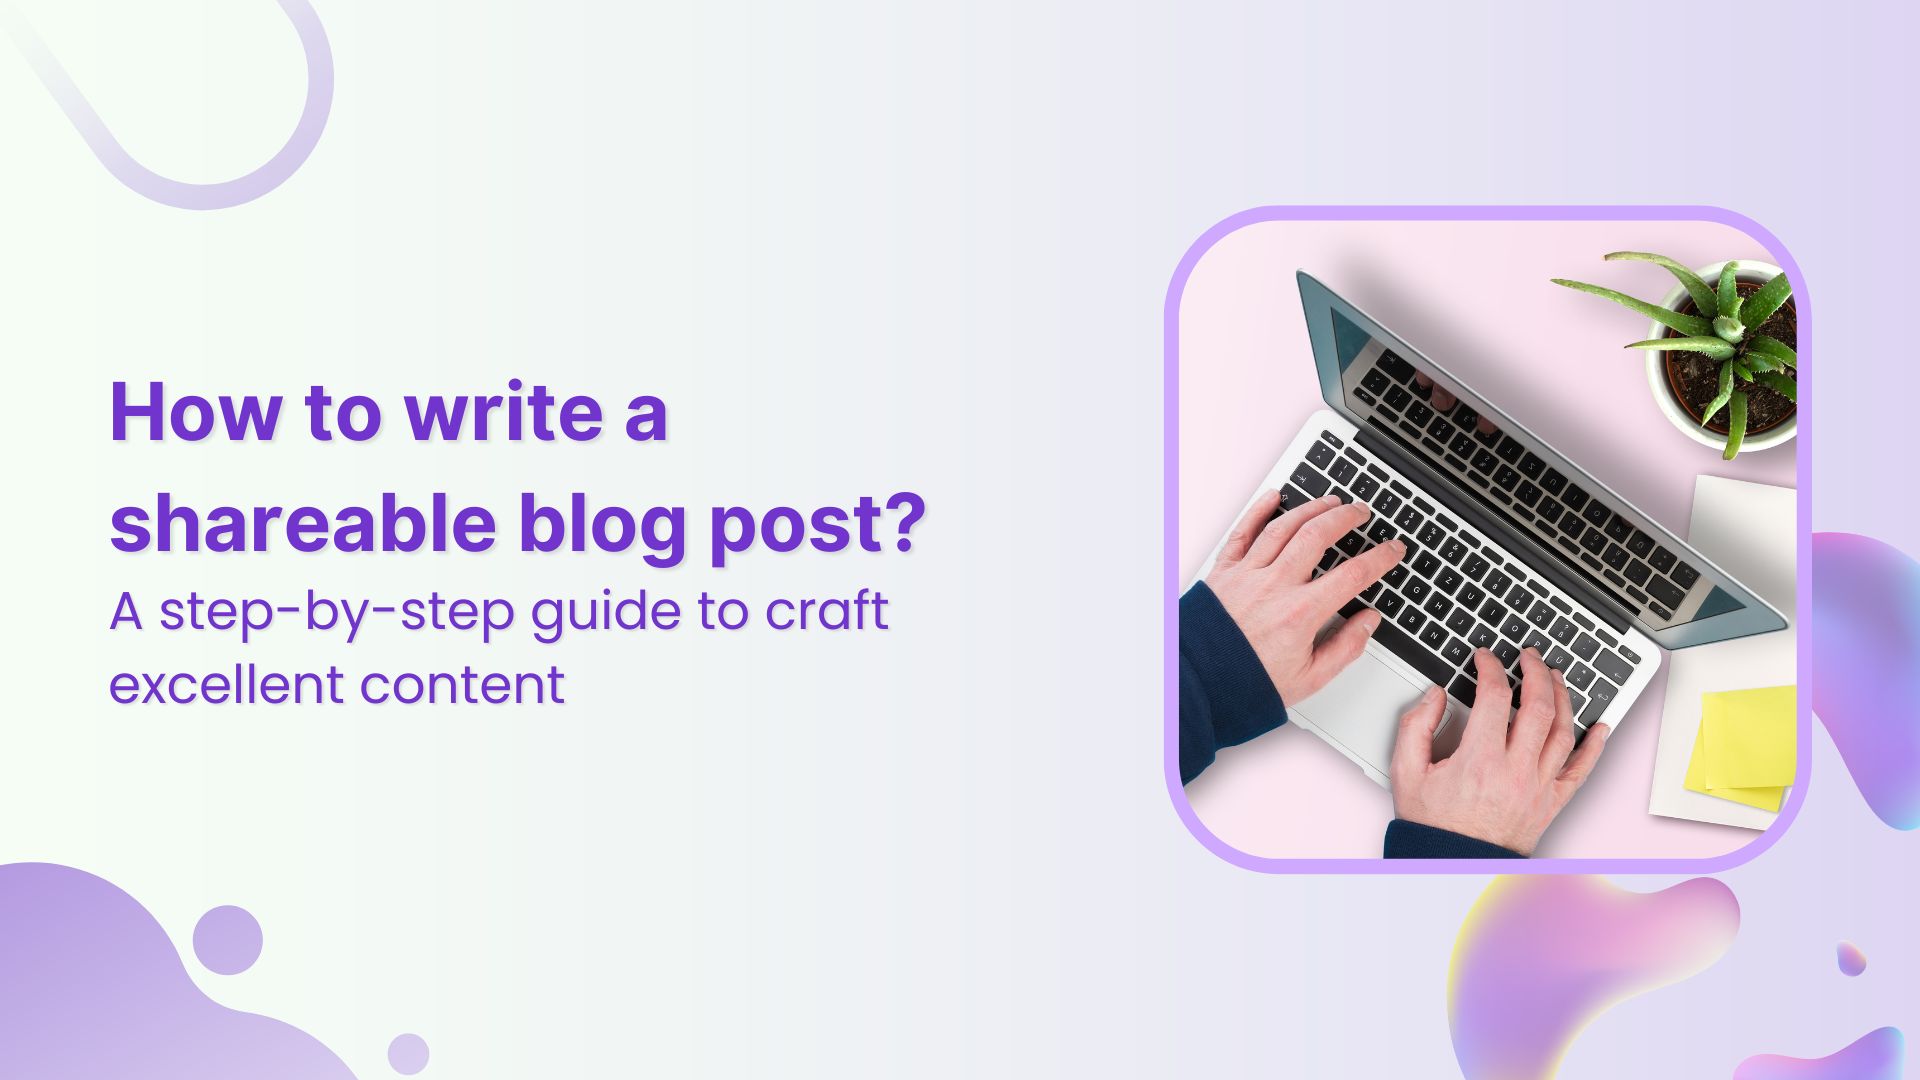 How to write a shareable blog post: Step-by-step guide